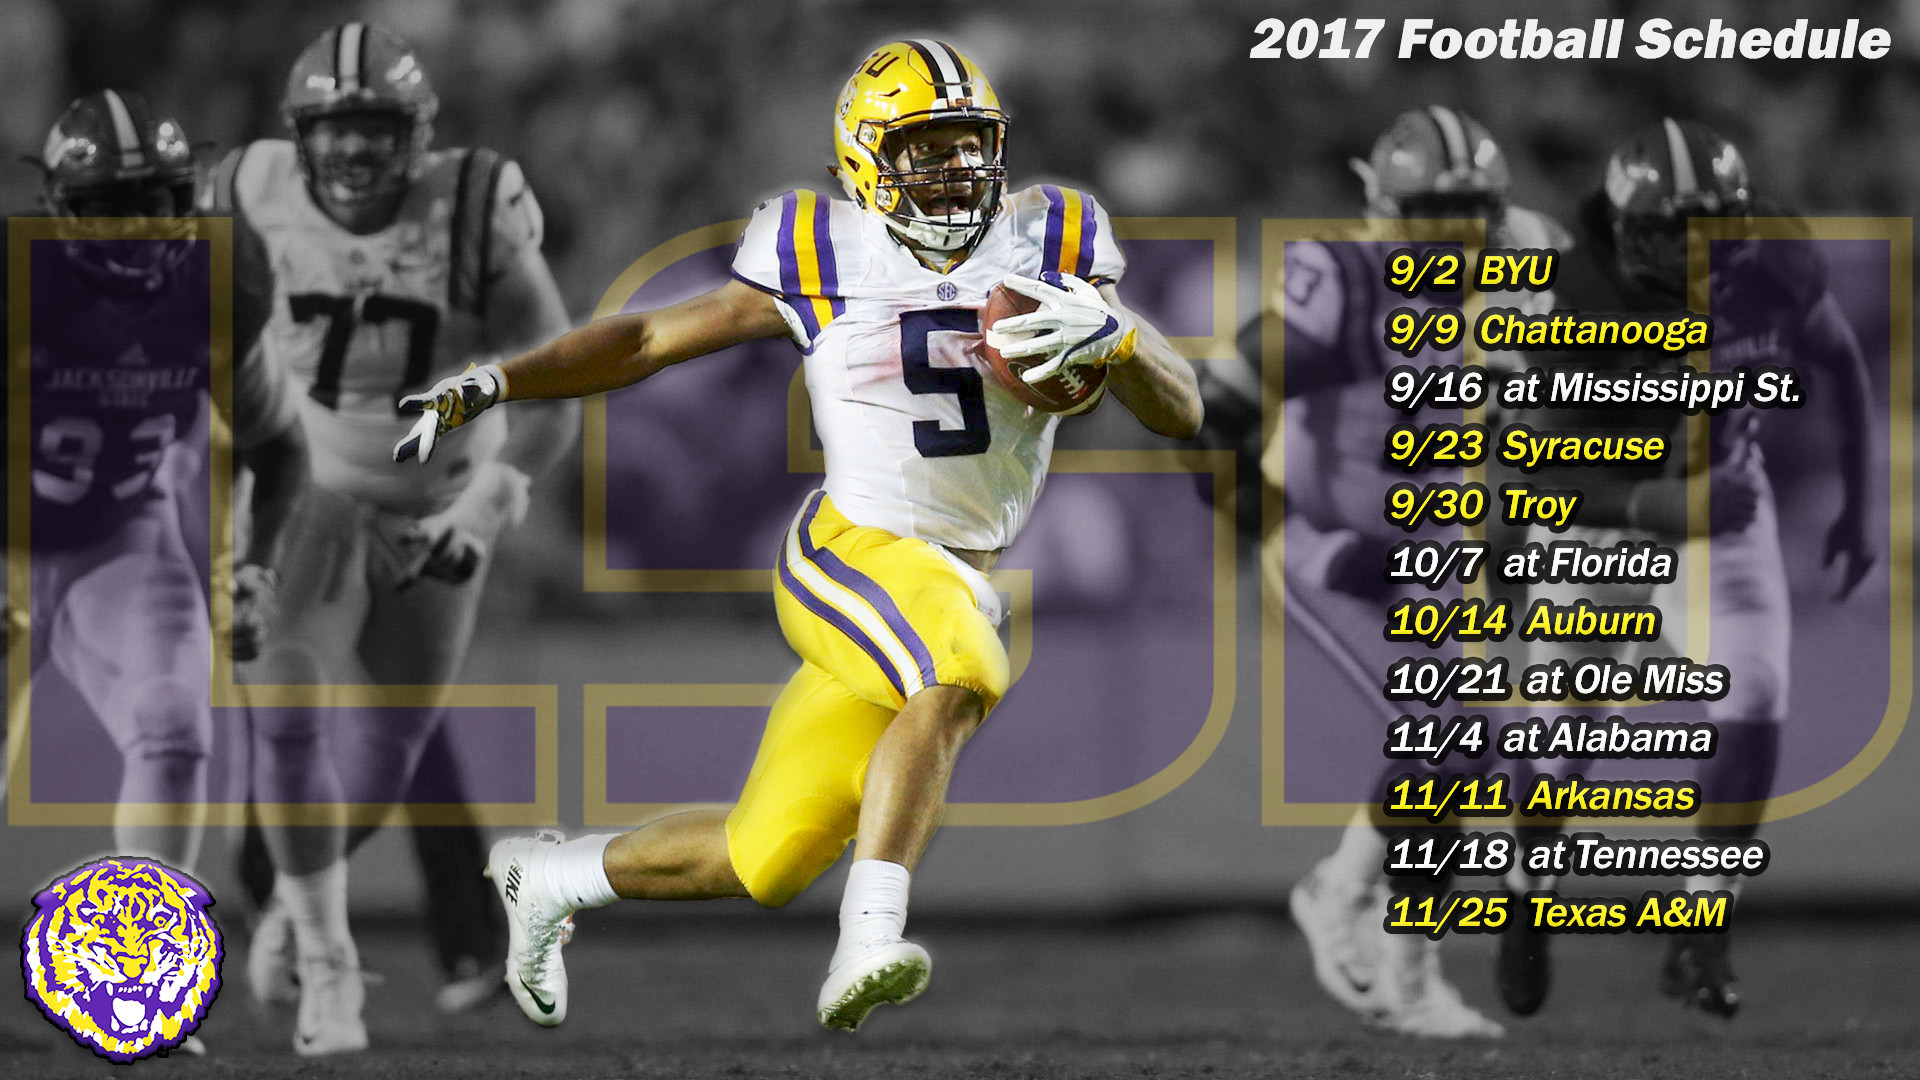 1920x1080  Figured I'd share with the GOAT LSU site, plan on making more